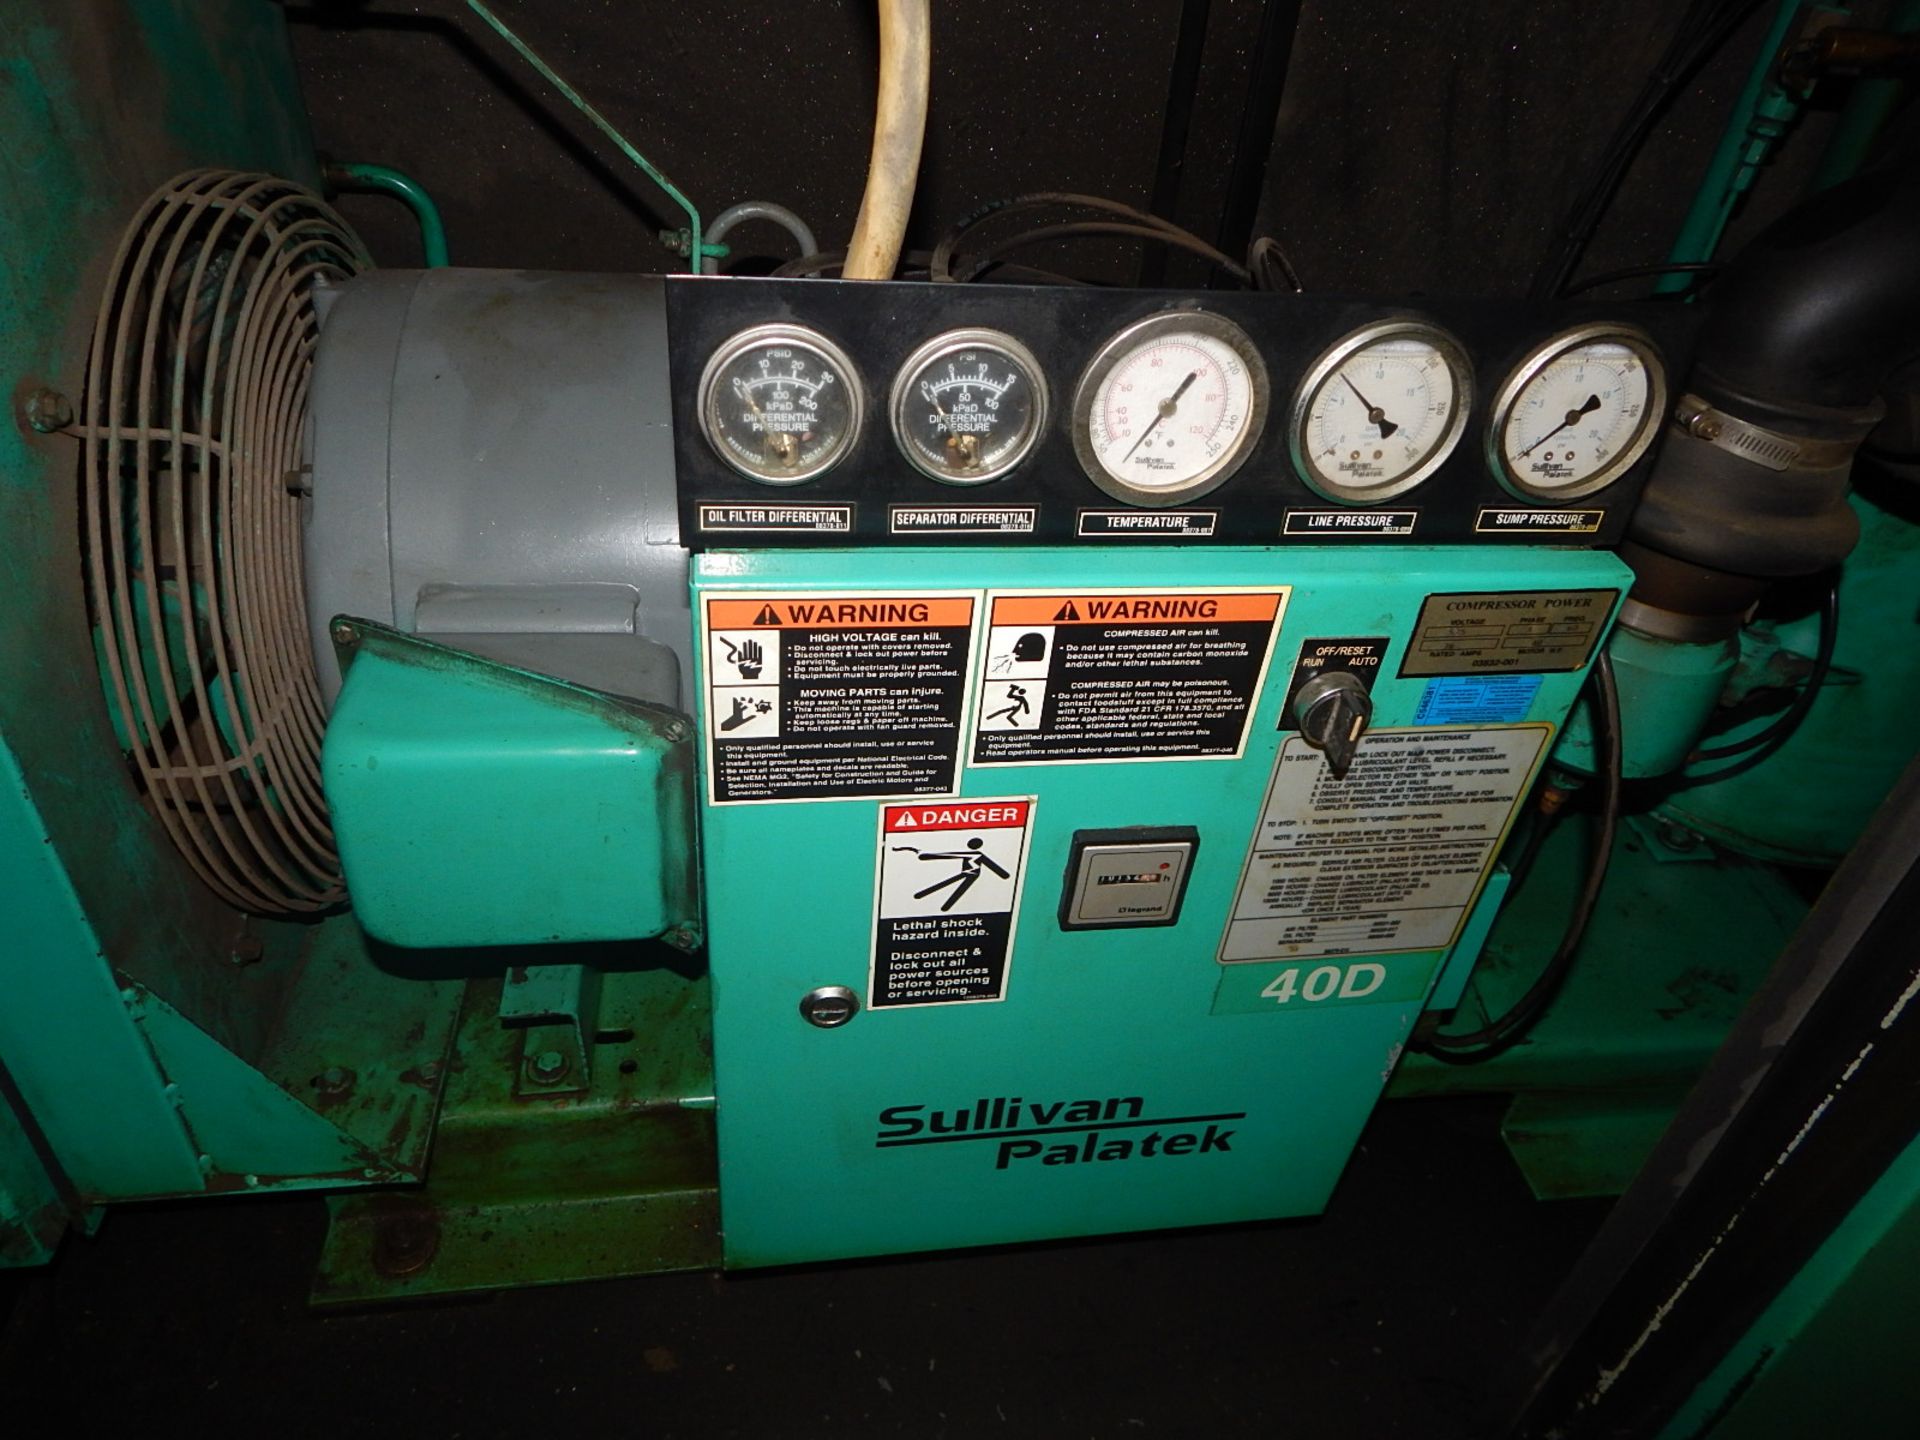 SULLIVAN PALATEK 40D ROTARY SCREW AIR COMPRESSOR WITH 40 HP, 10,151 HOURS (RECORDED AT TIME OF - Image 2 of 3